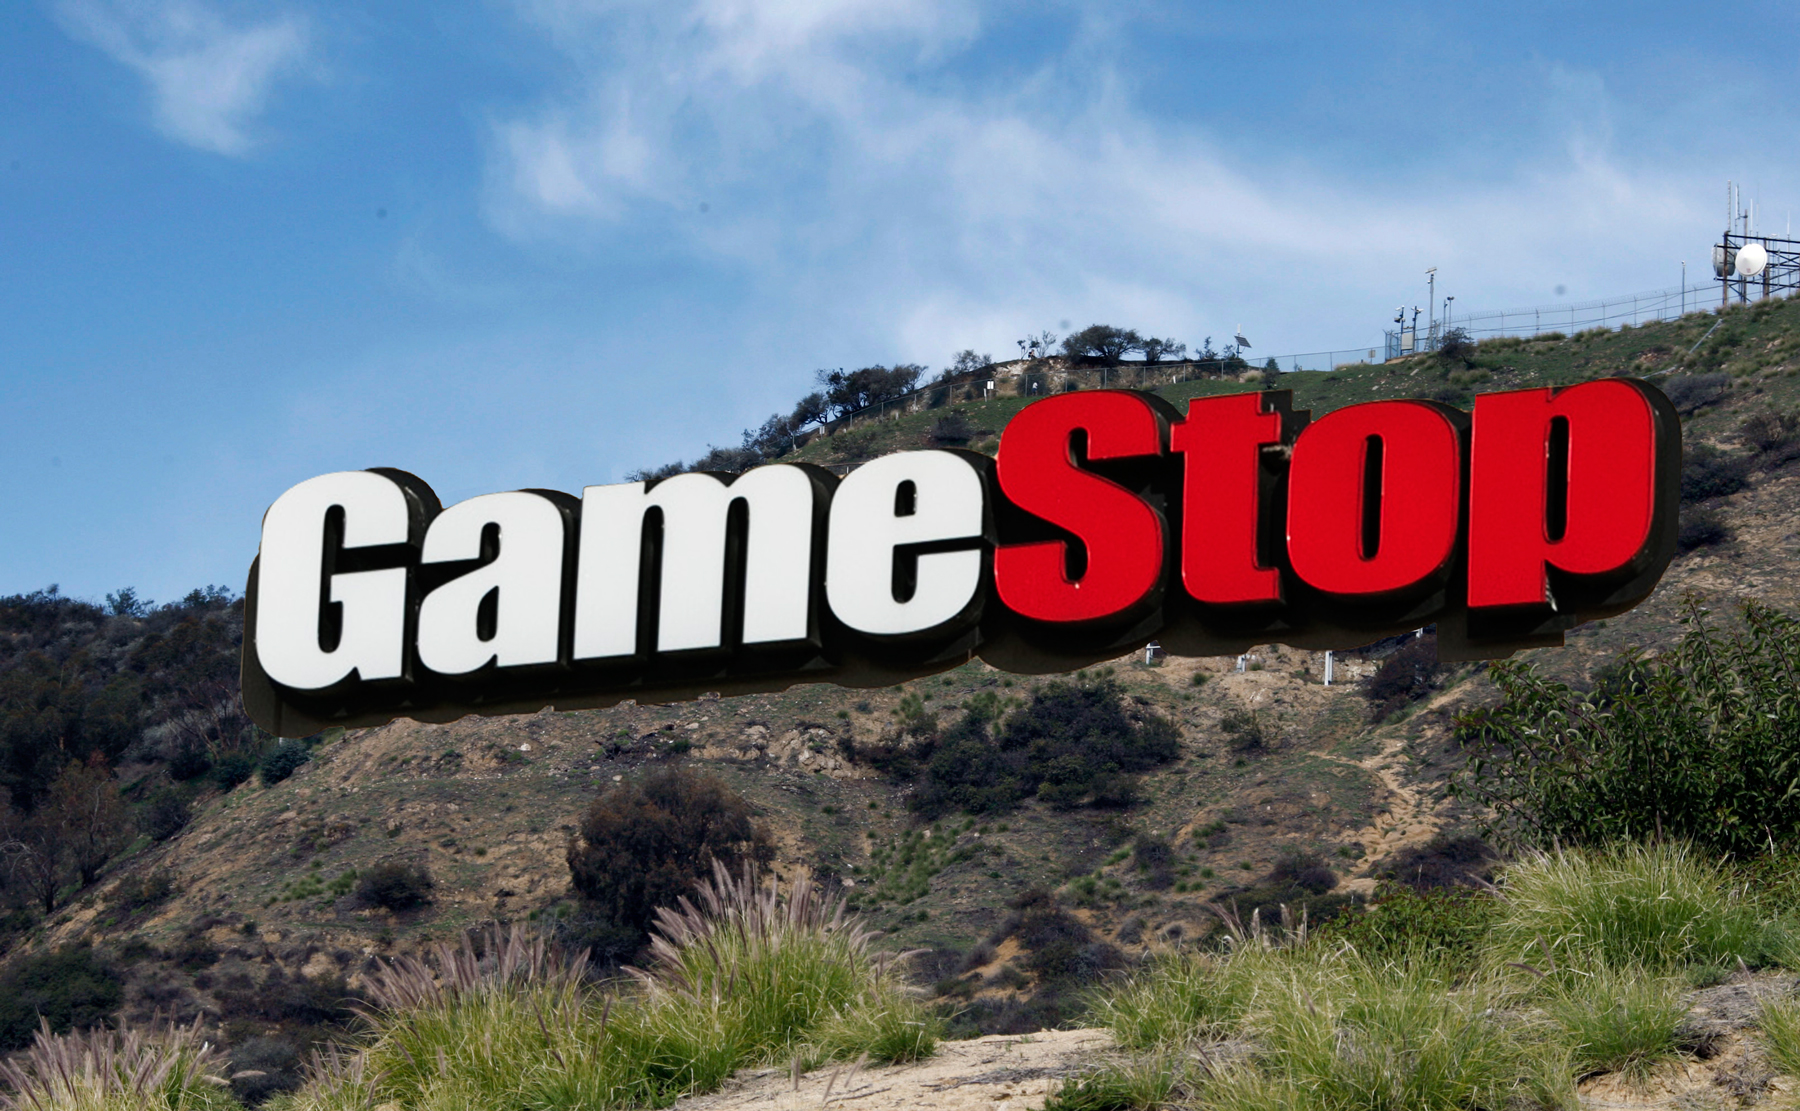 Hollywood Hopes to Take Films About GameStop to the Moon